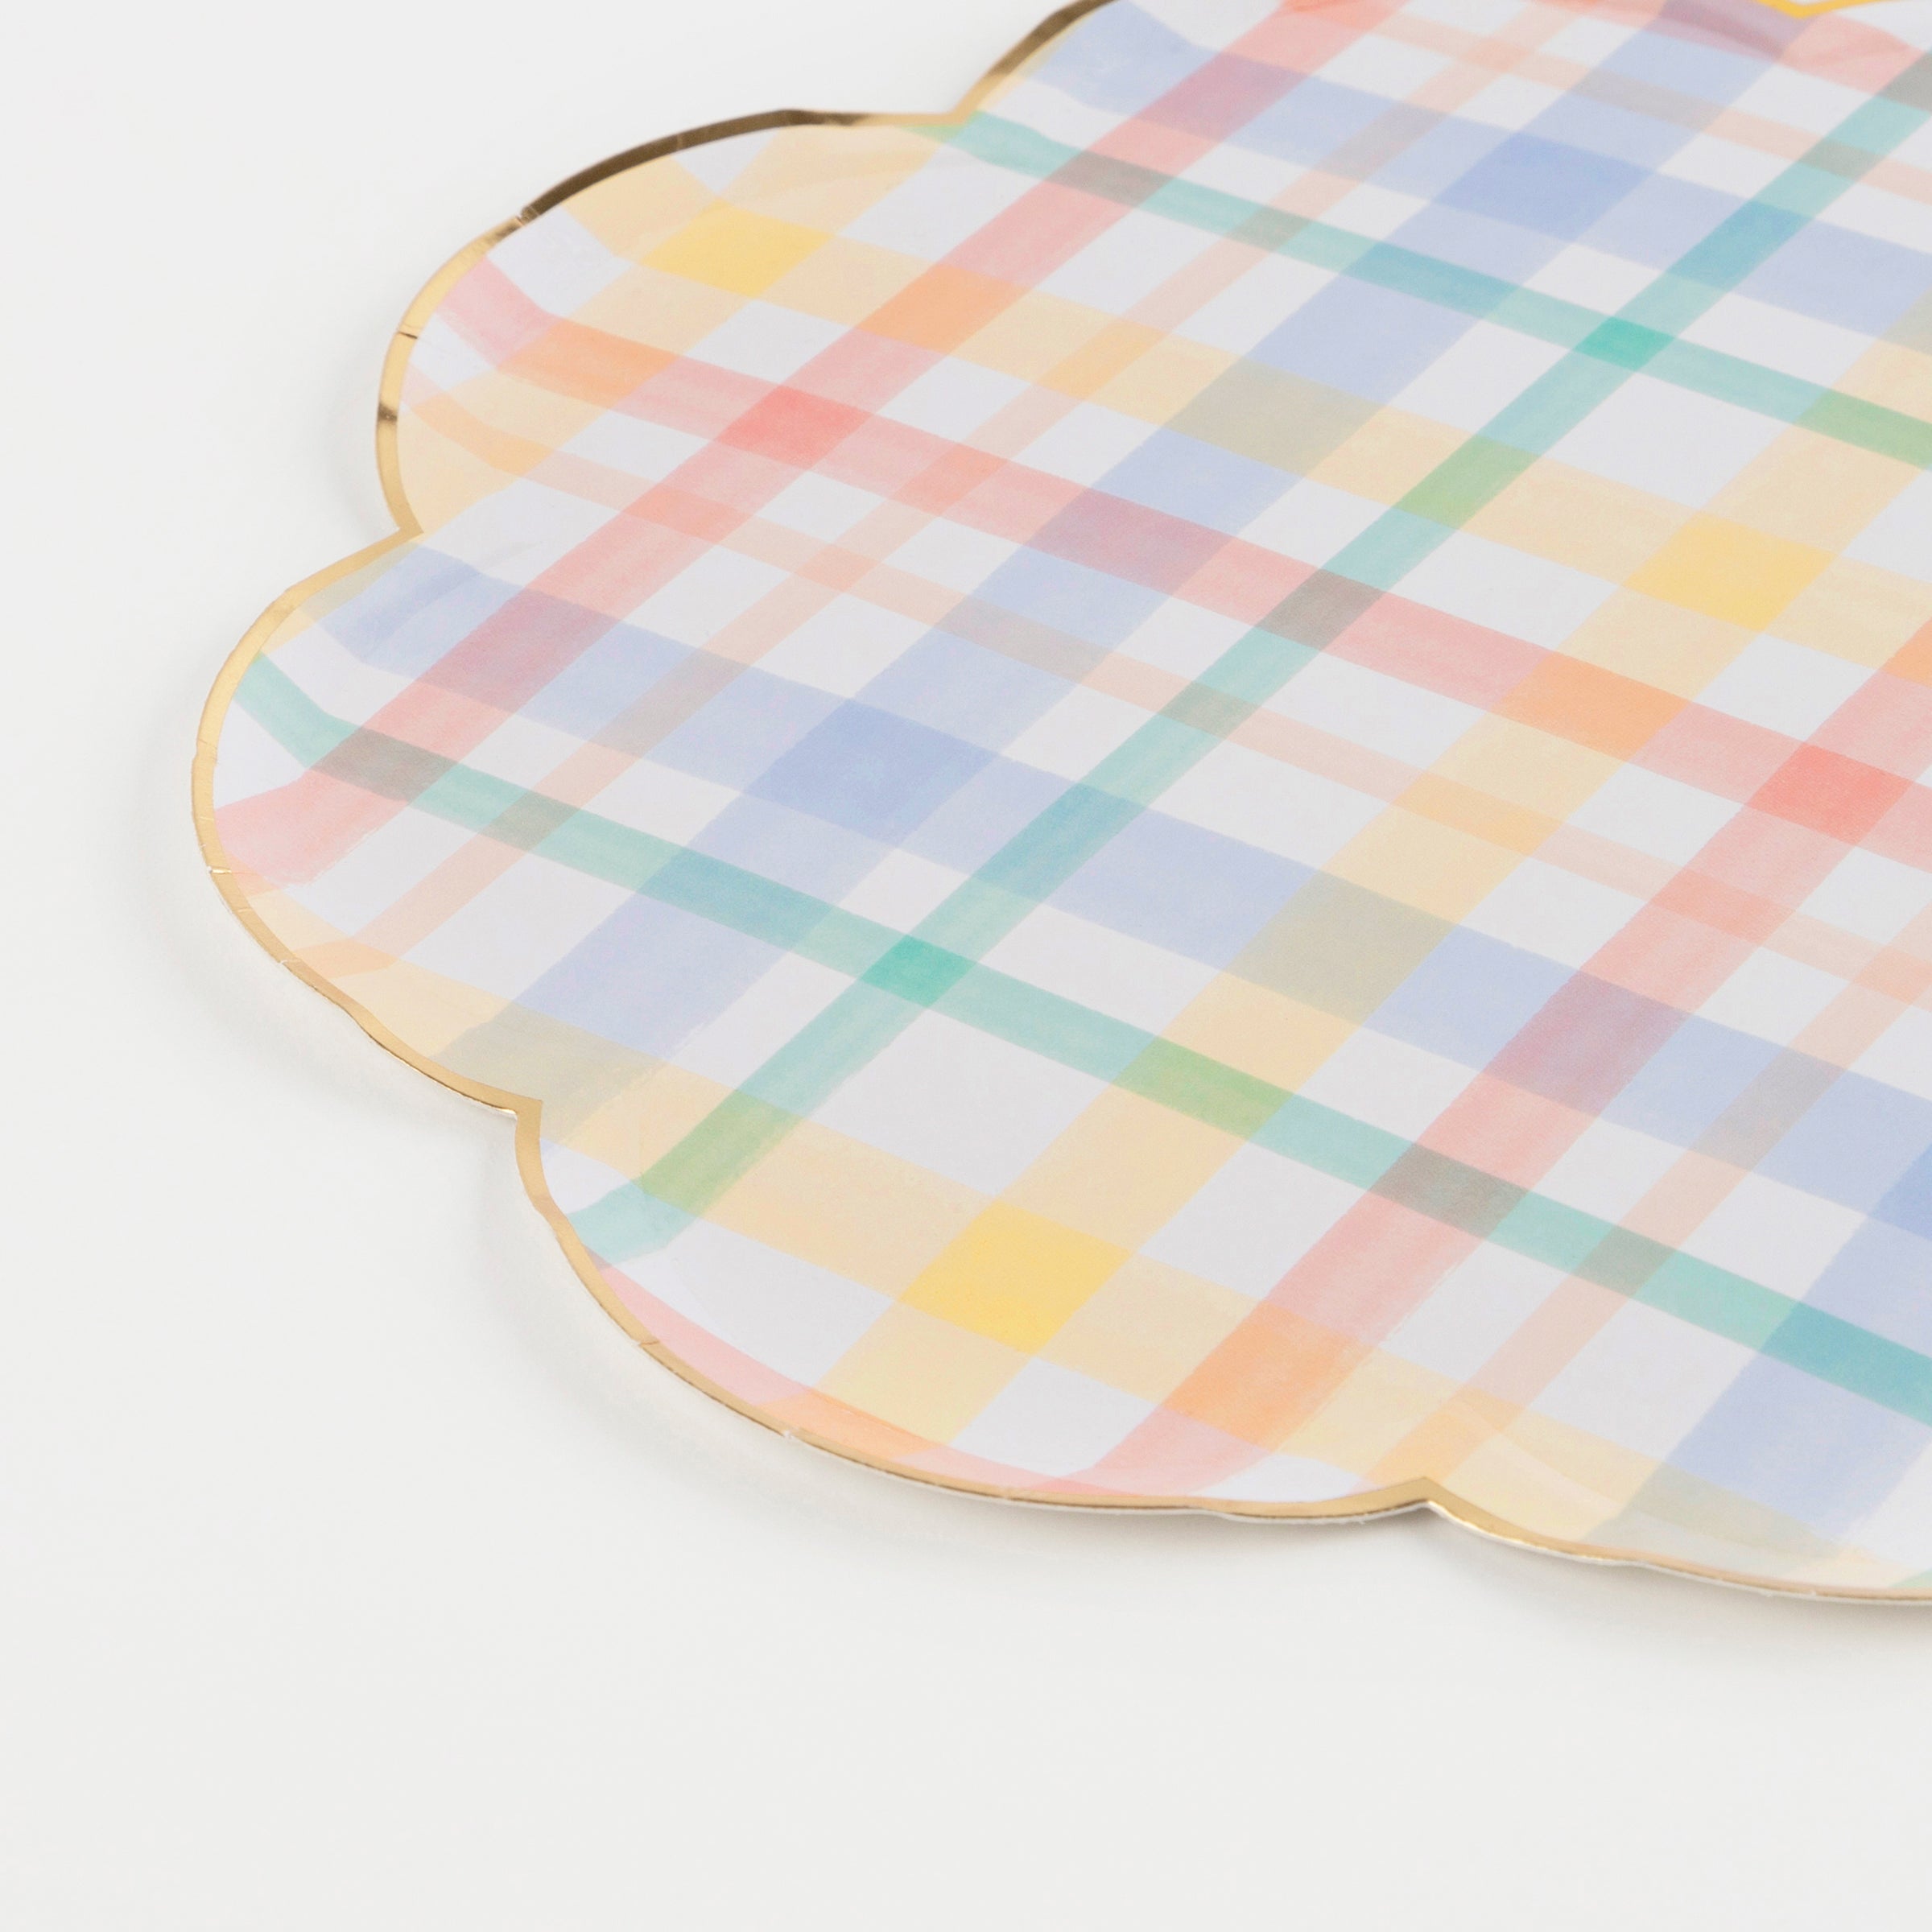 Our stylish paper plates with soft muted colors are perfect for kids birthday party ideas.